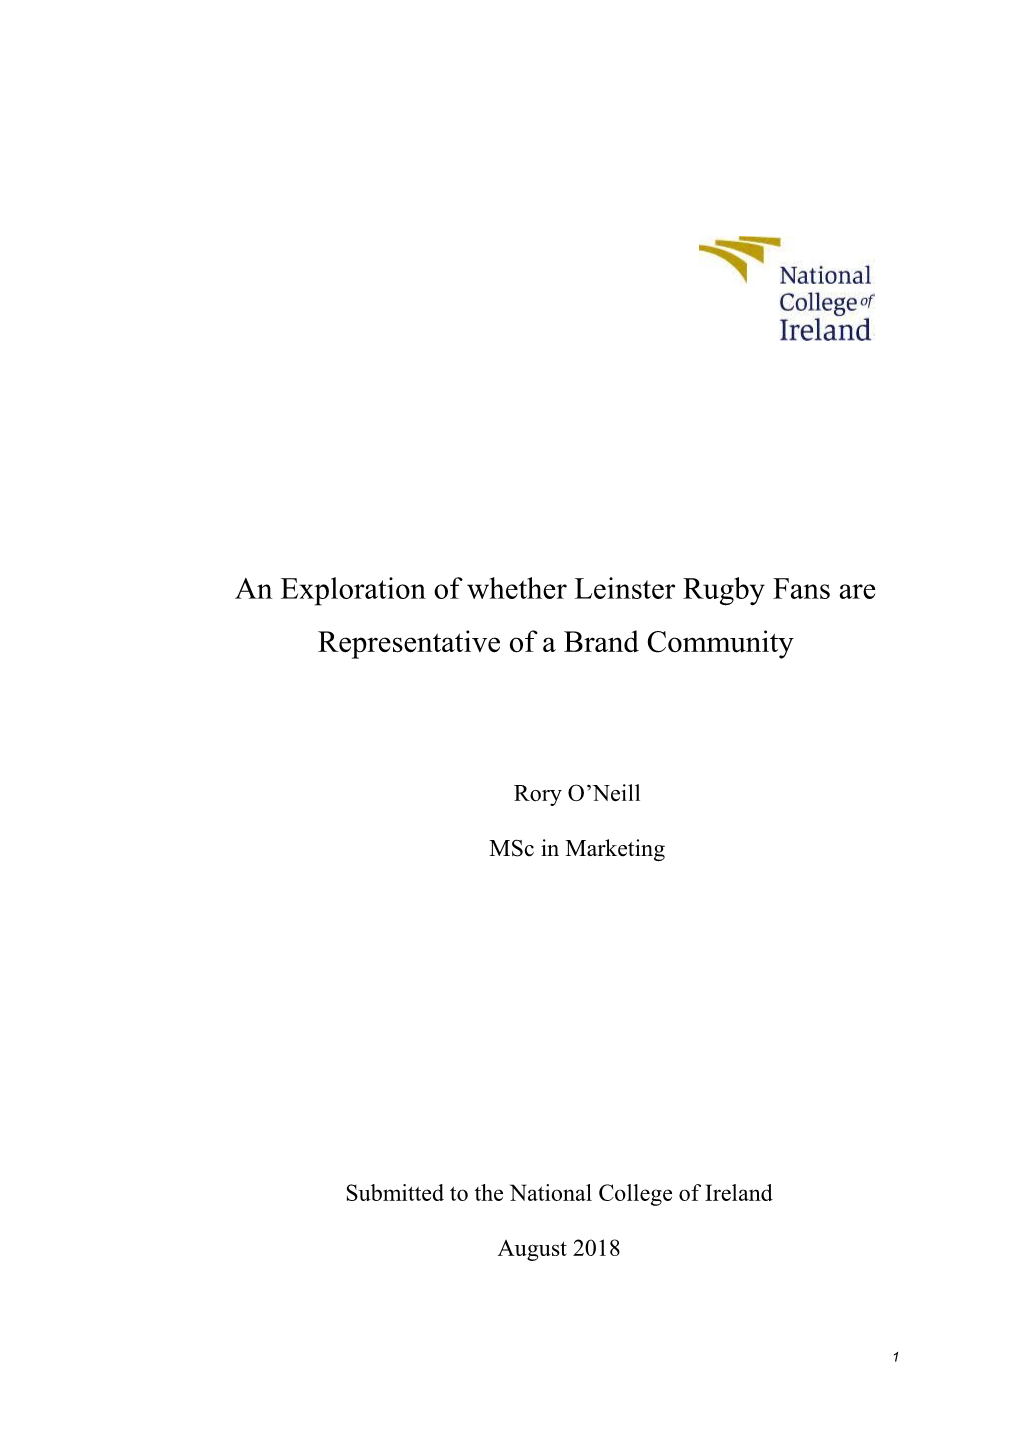 An Exploration of Whether Leinster Rugby Fans Are Representative of a Brand Community